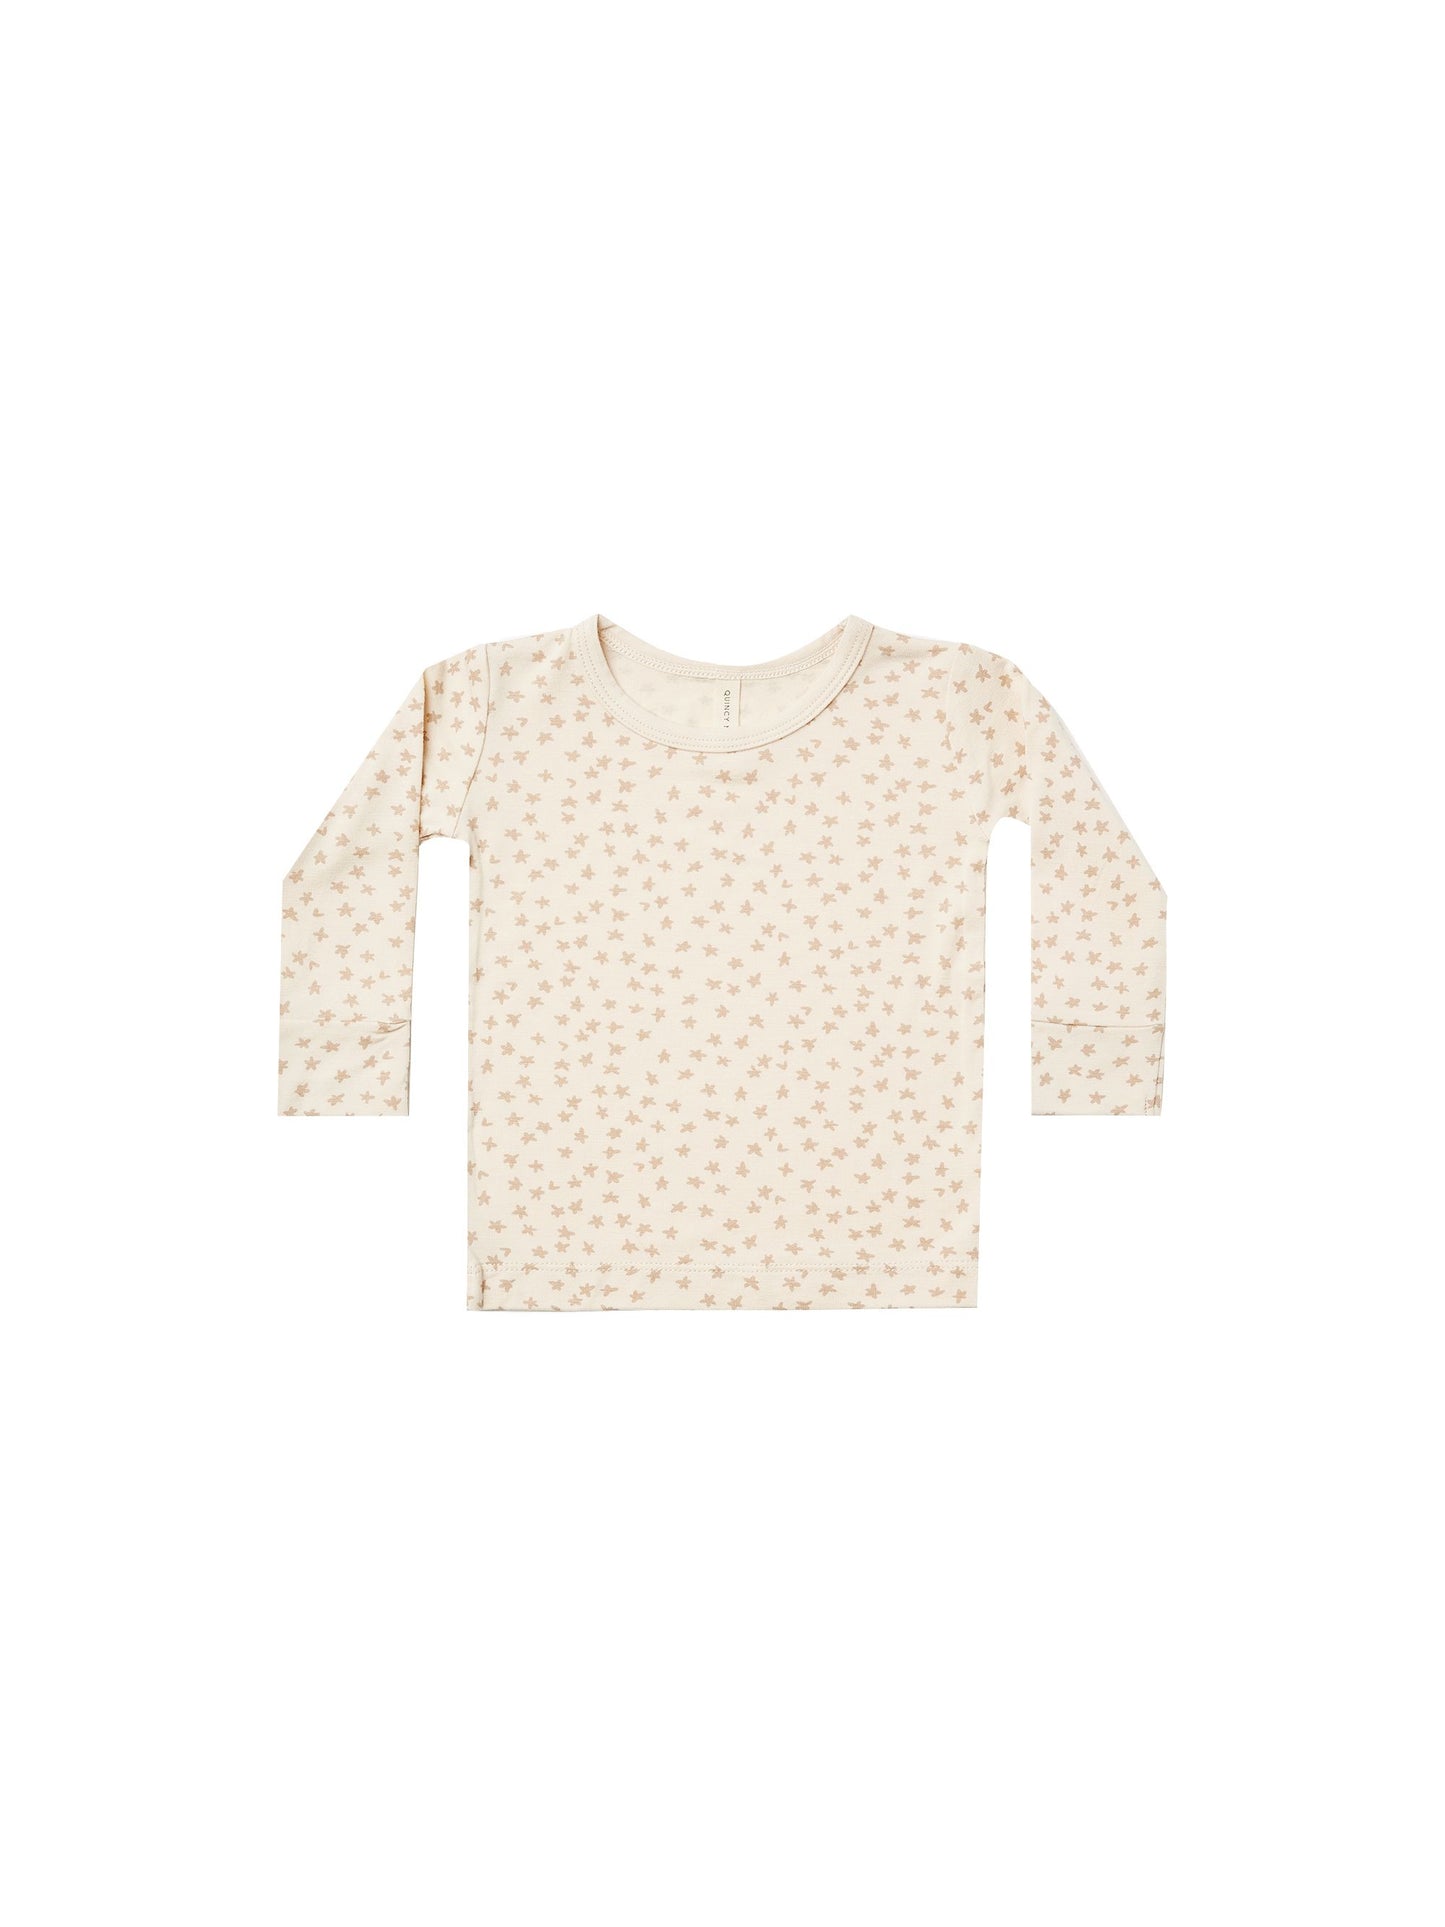 Quincy Mae - Bamboo Longsleeve Tee - Scatter - LAST ONE - 3-6M